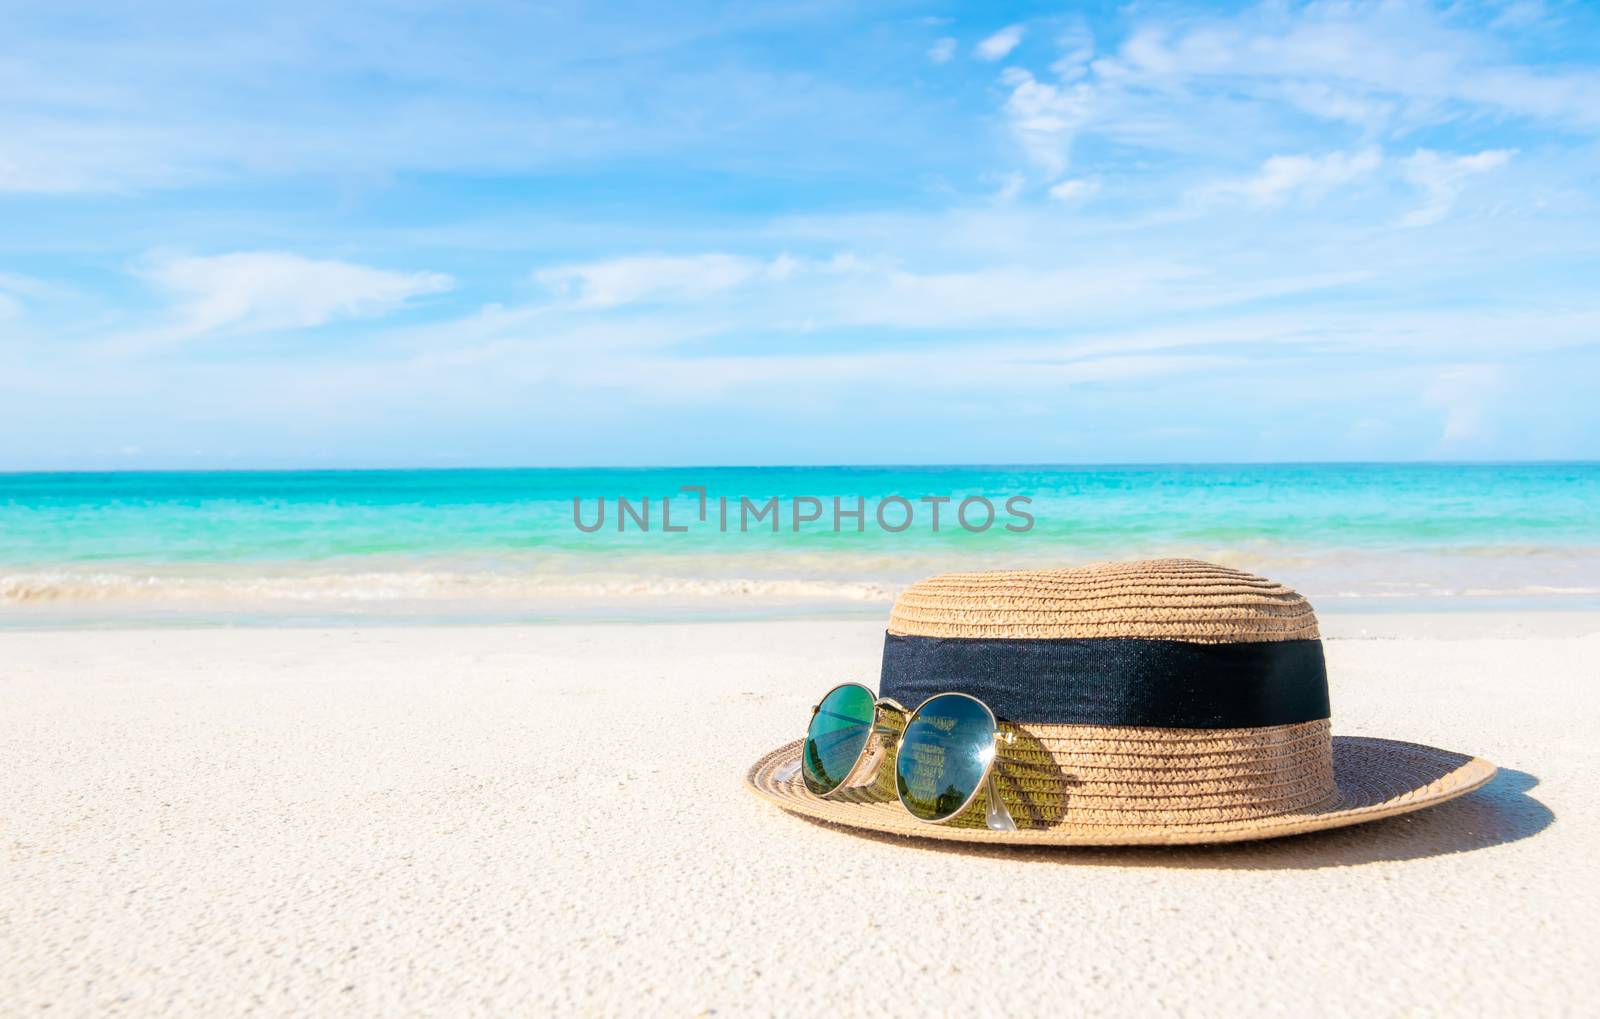 Hats and glasses placed on the beach and sea have a holiday summer relaxing and travel bright sky koh lipe thailand by sompongtom